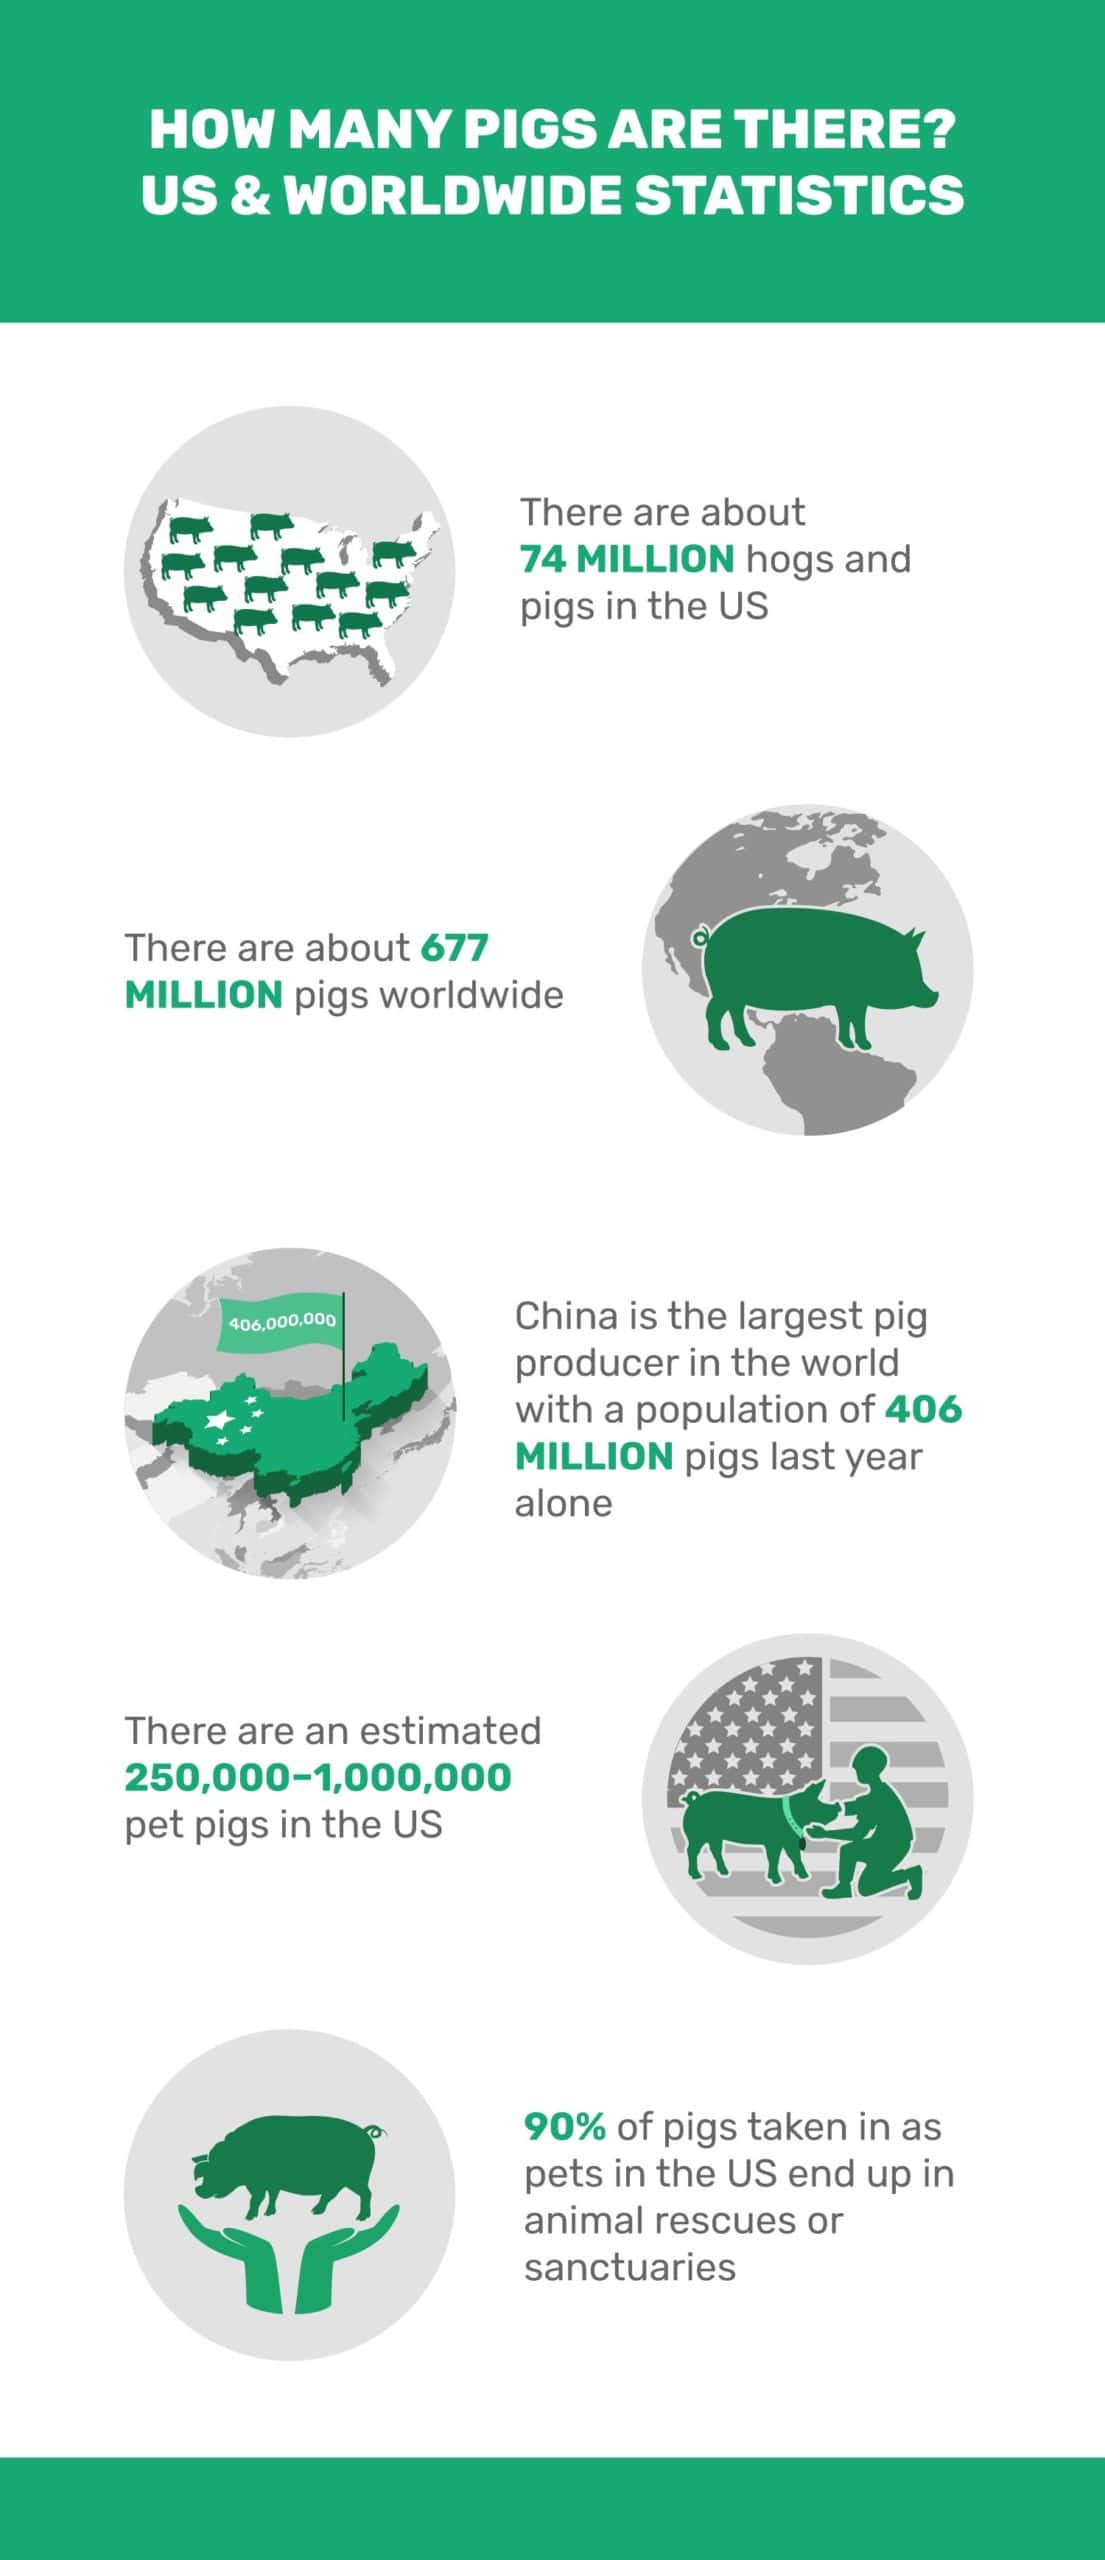 HOW-MANY-PIGS-ARE-THERE-US-&-WORLDWIDE-STATISTICS